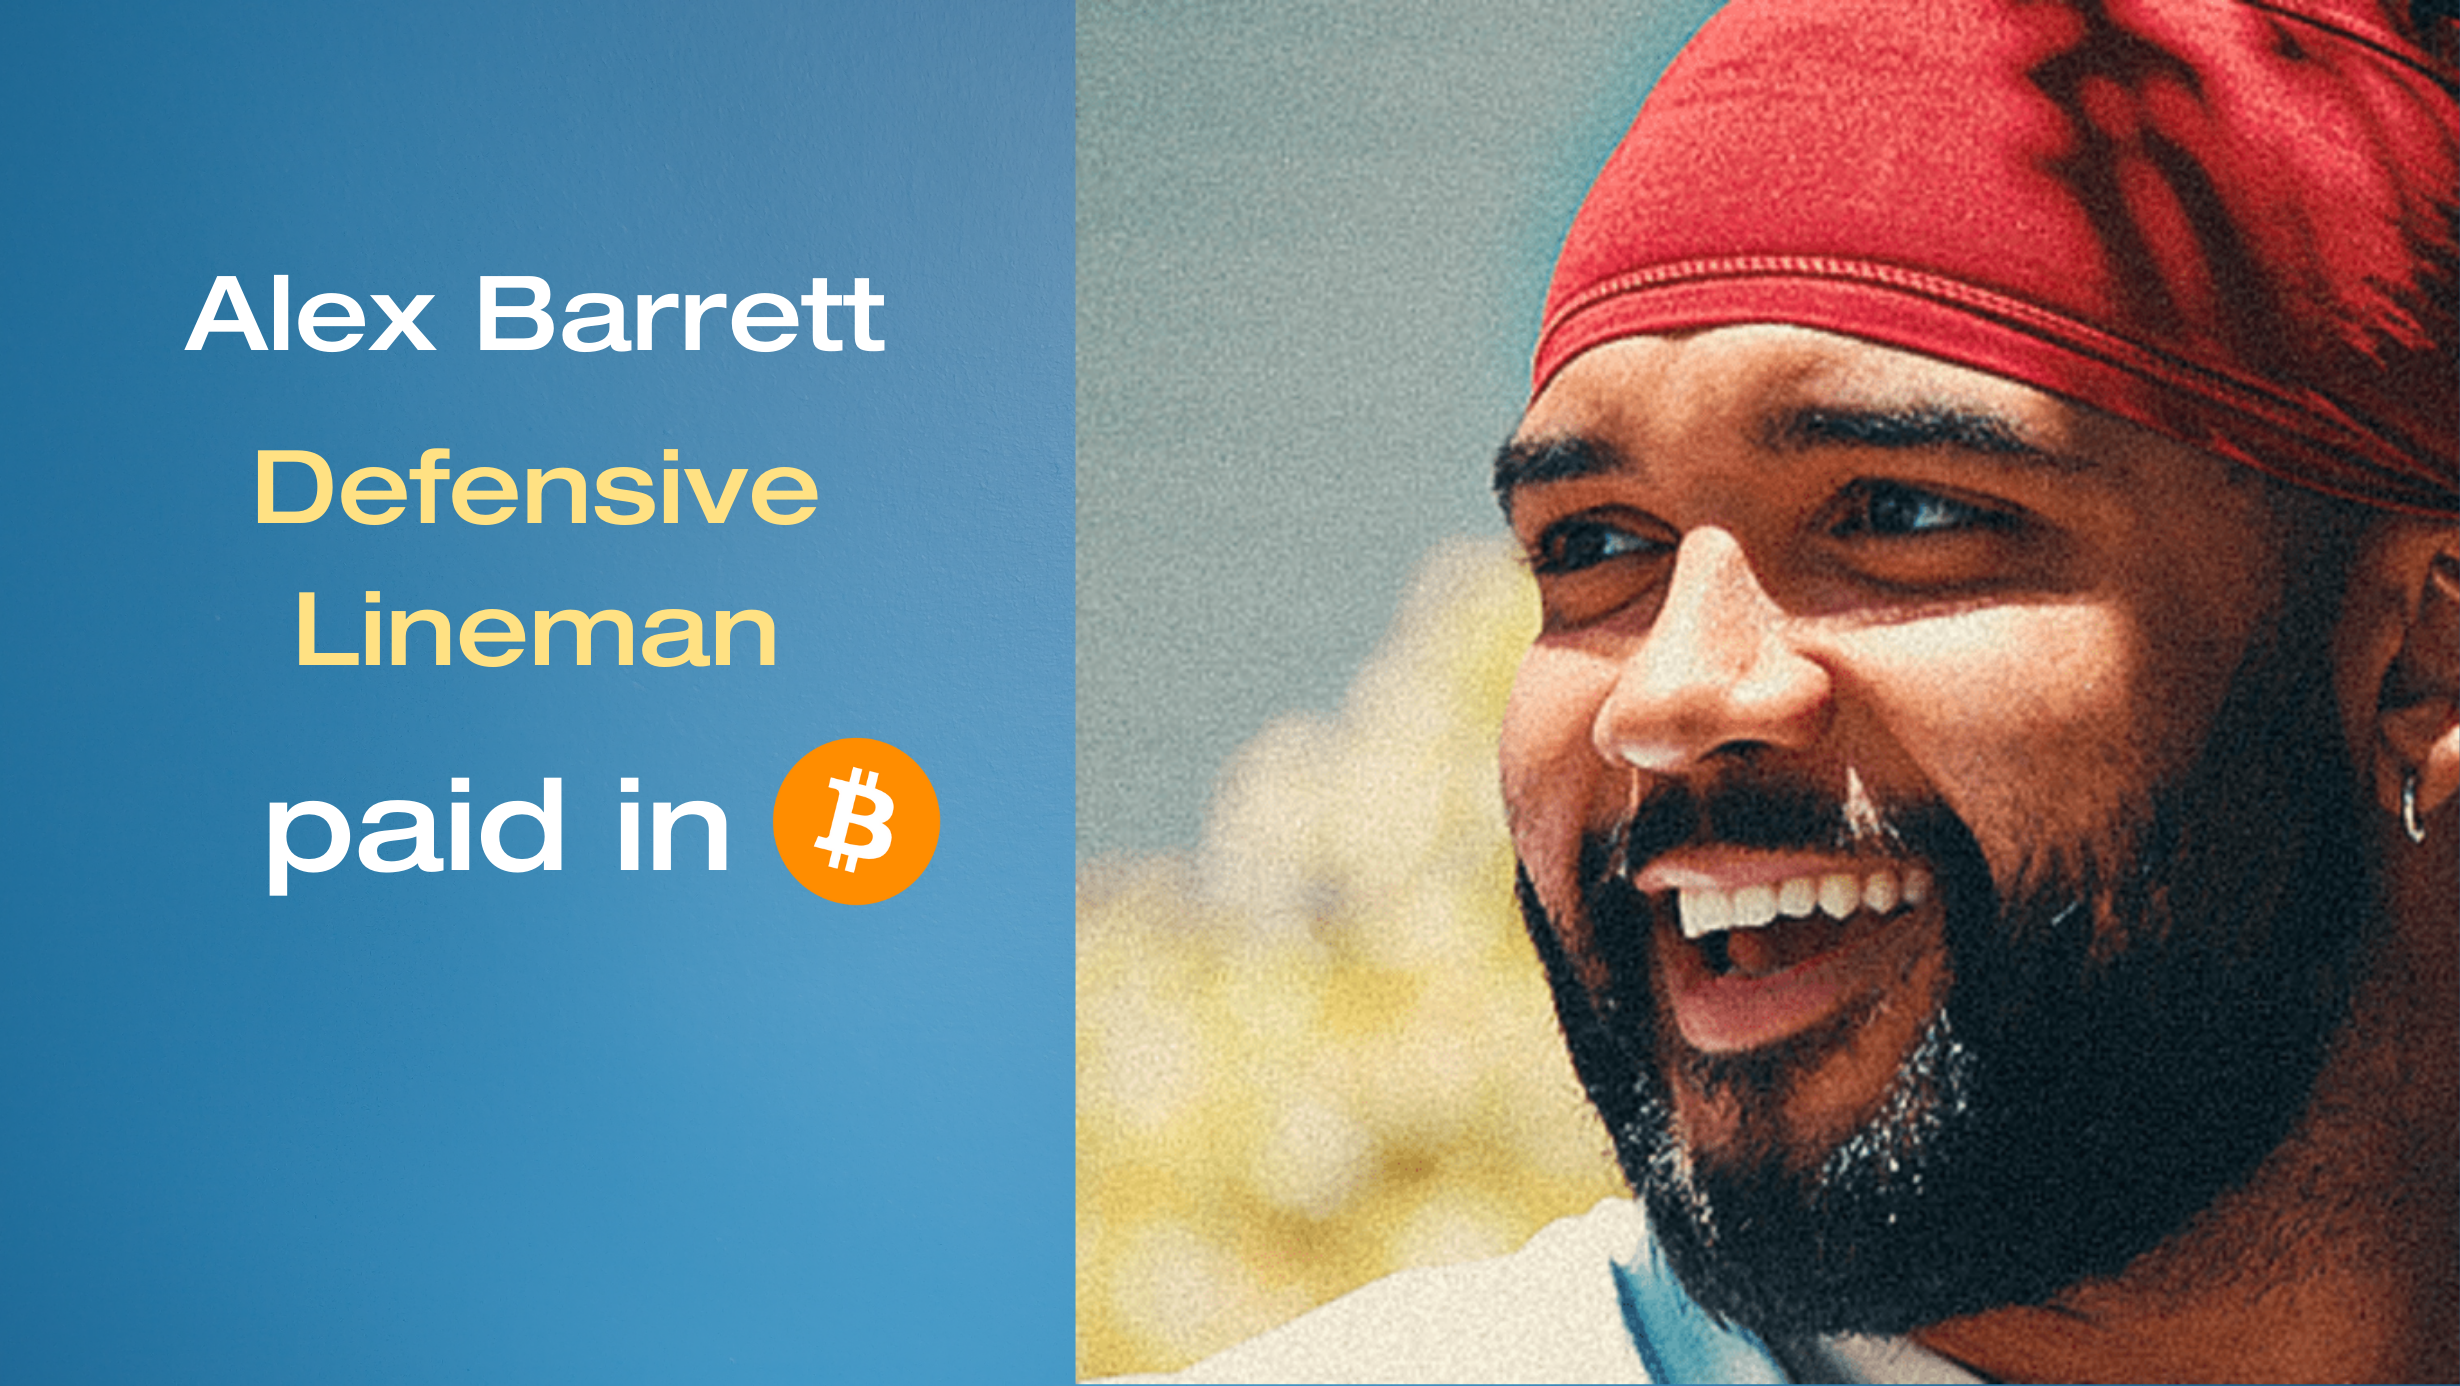 Professional Football Player Alex Barrett Gets Paid in Bitcoin with Bitwage